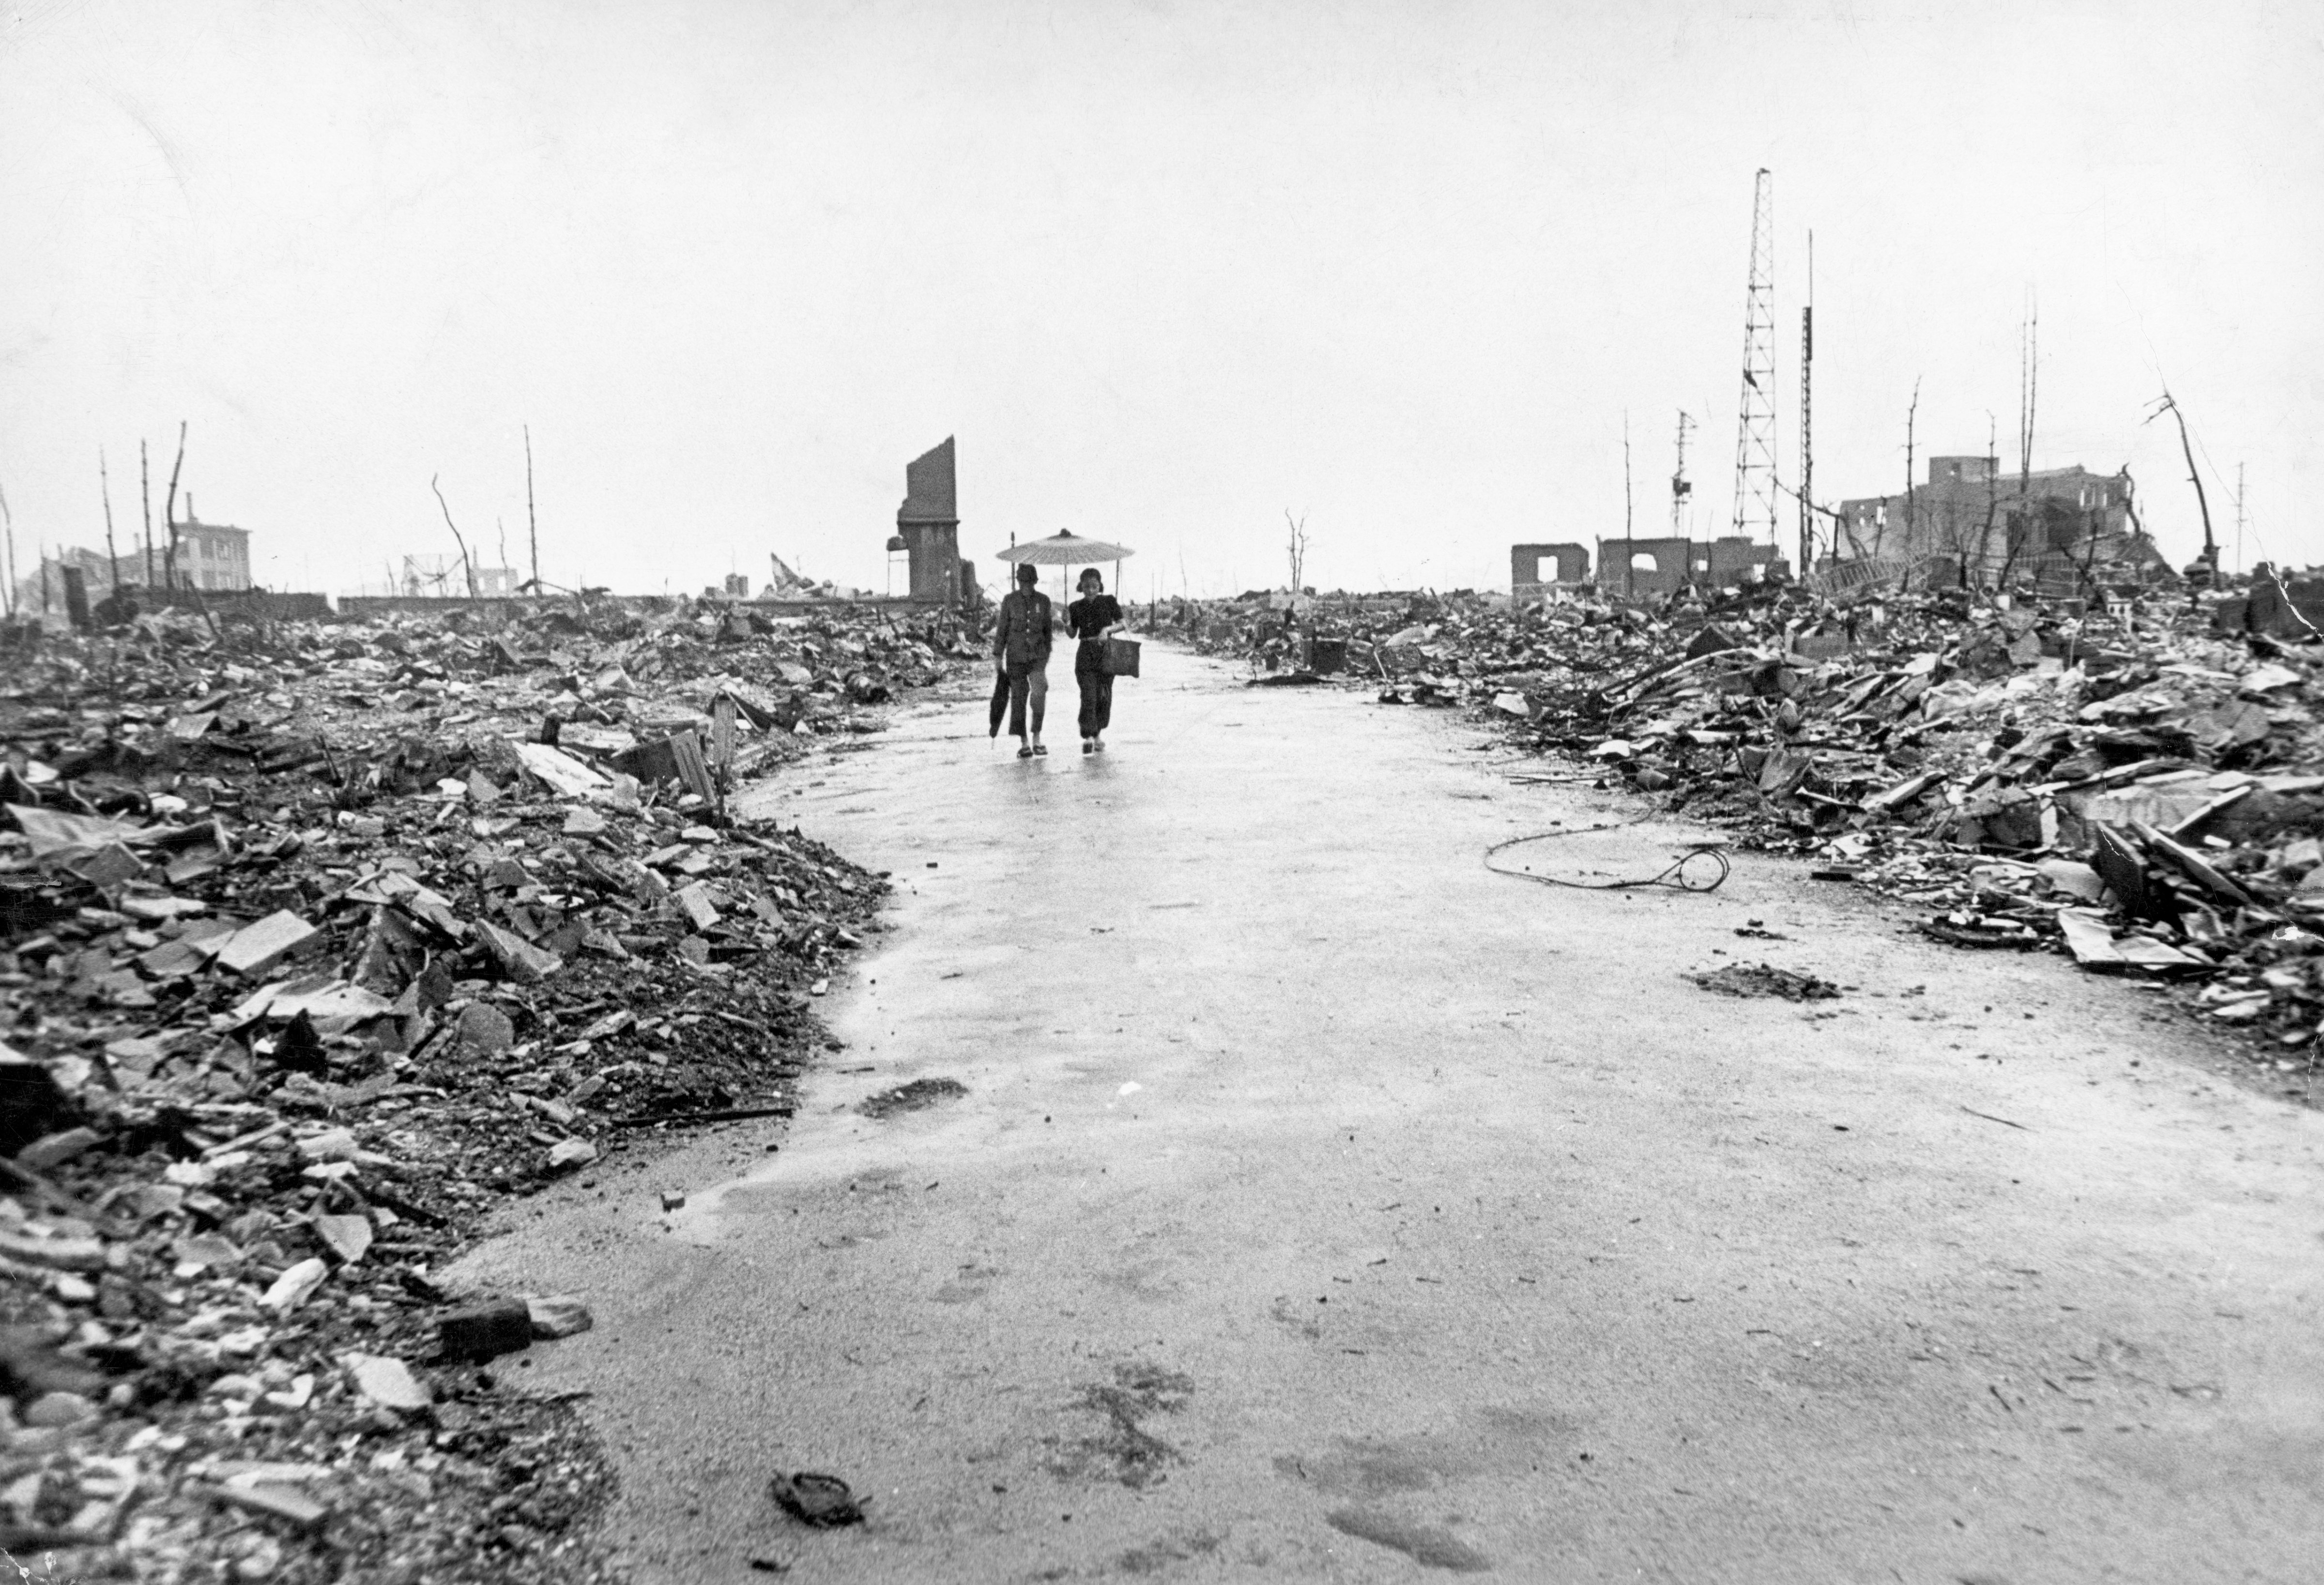 Hiroshima in ruins following the atomic bomb blast. (Bernard Hoffman—The LIFE Picture Collection/Getty Images)